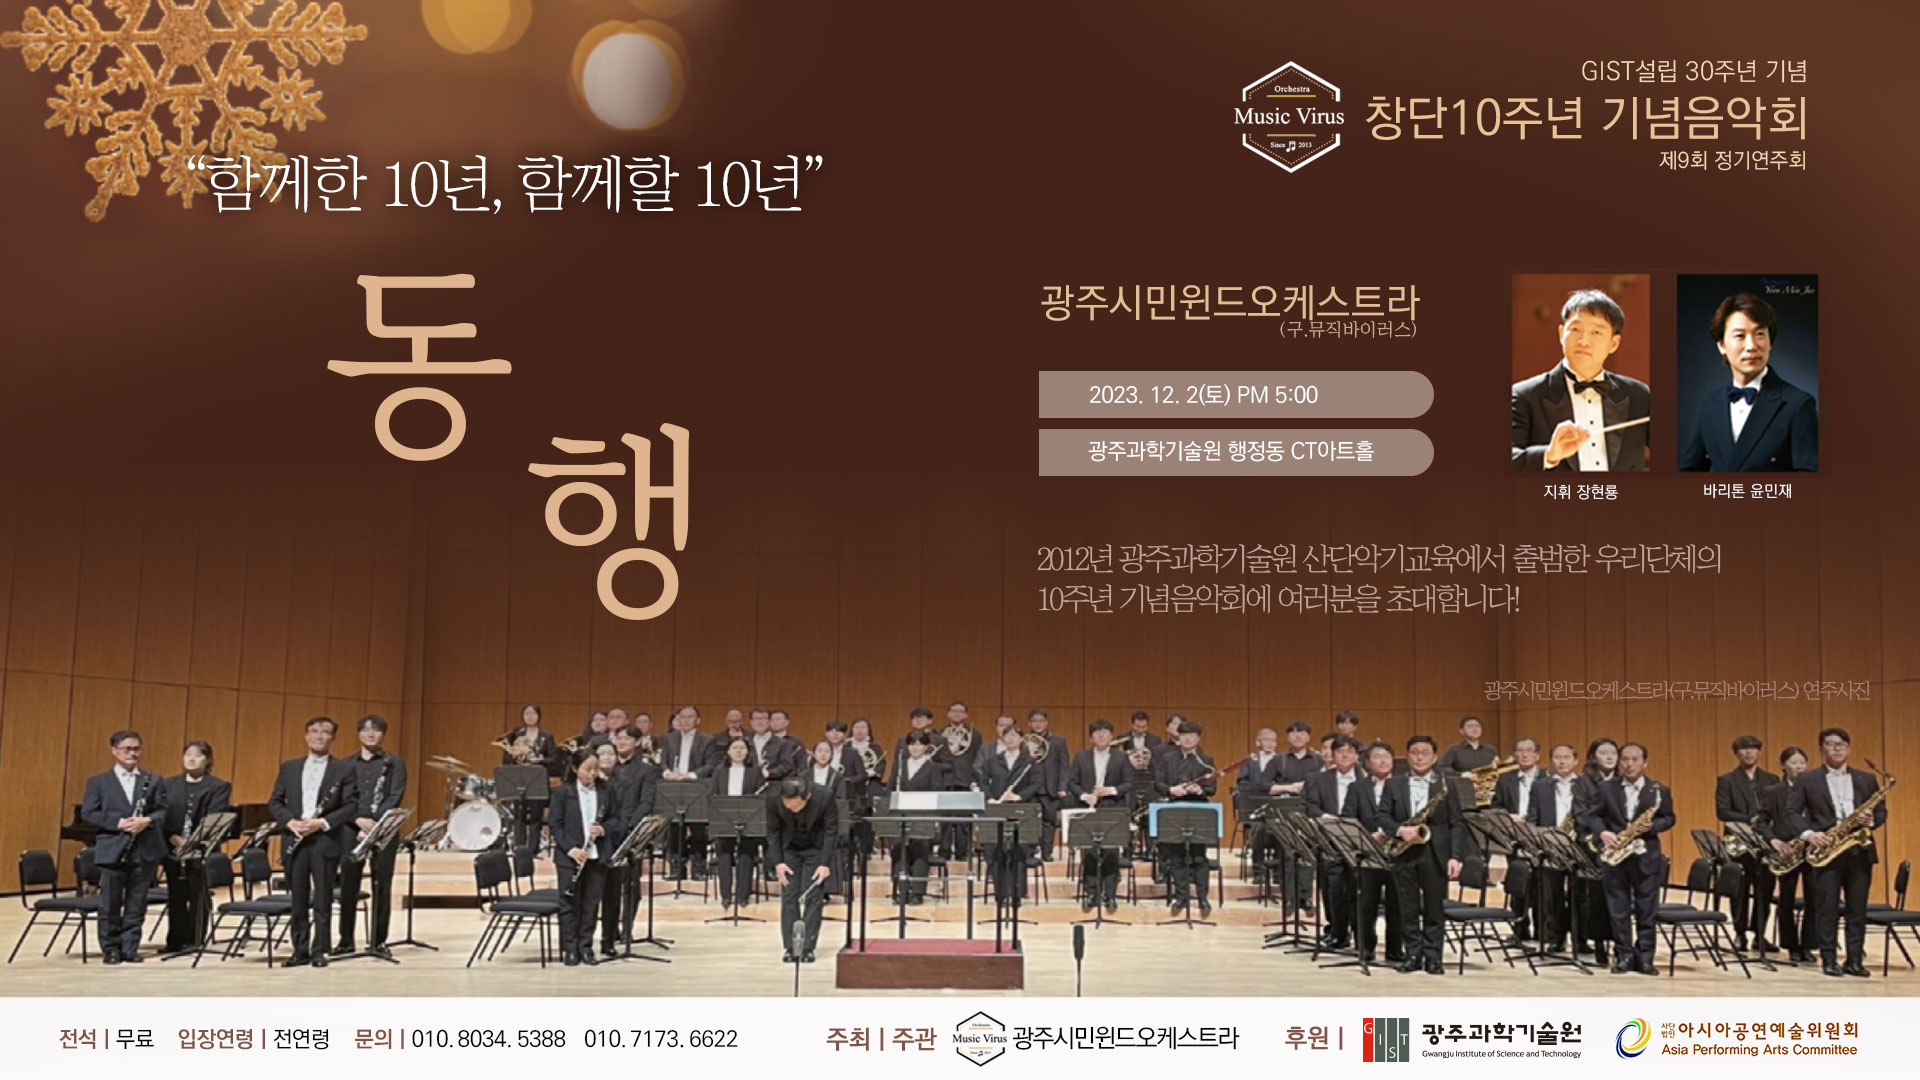 GIST Holds 10th Anniversary Performance of Citizen Orchestra... Efforts to revitalize local culture have paid off 이미지